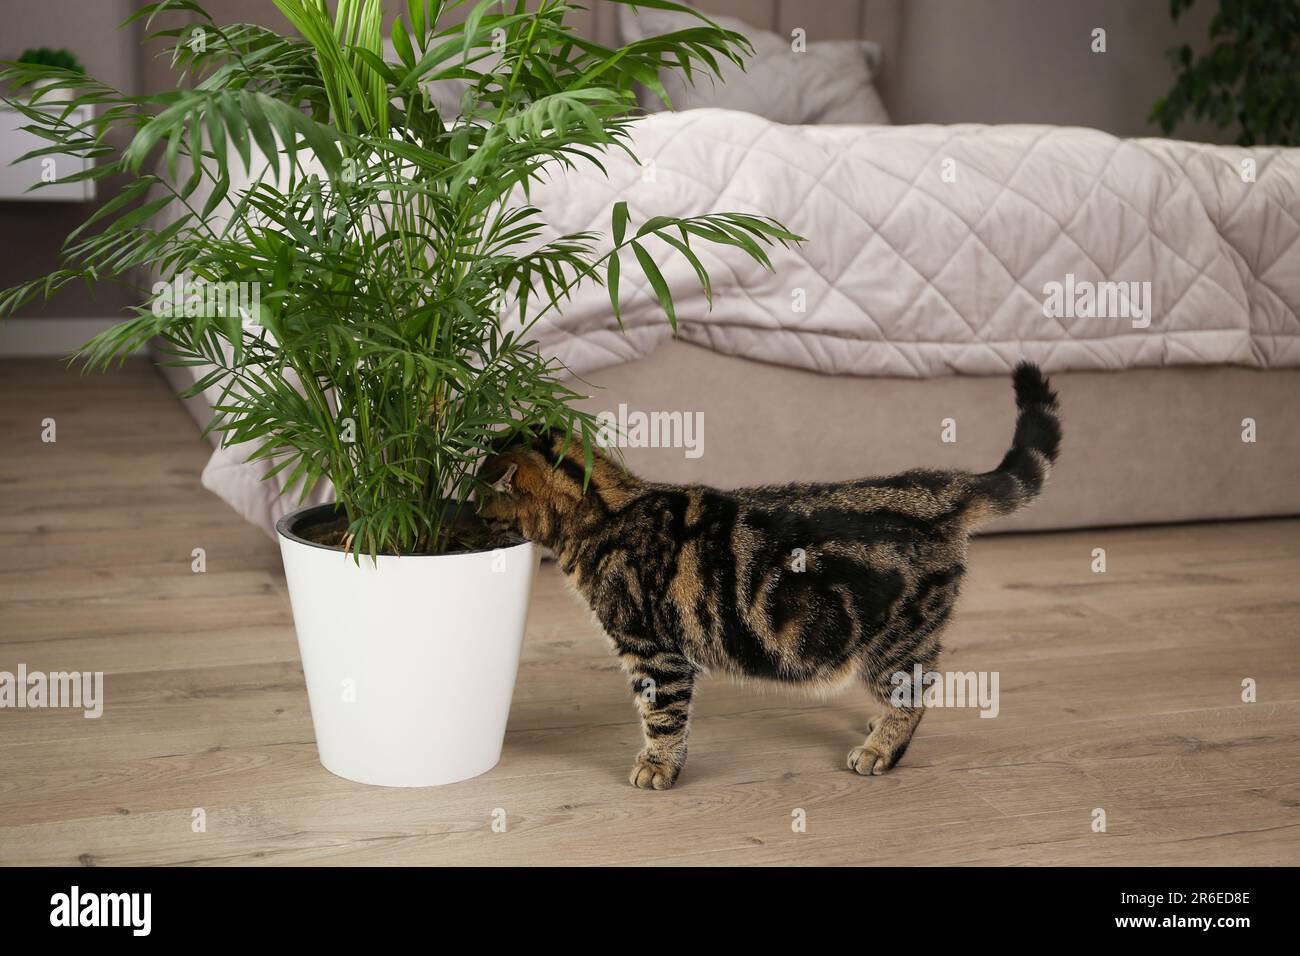 The cat sniffs a pot with a flower. Stock Photo